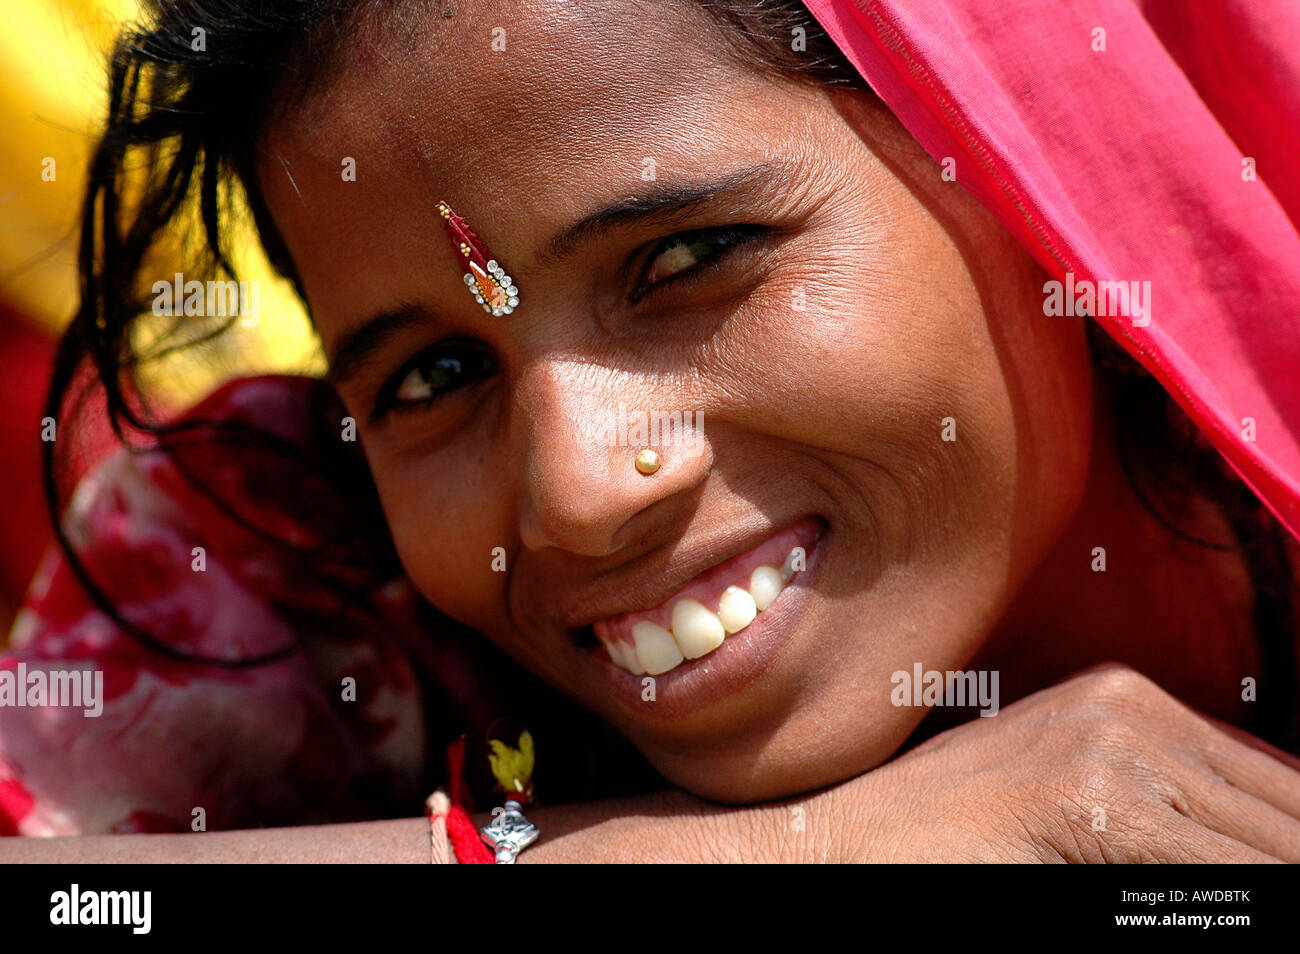 Face of a young woman, Jaipur, Rajasthan, India Stock Photo